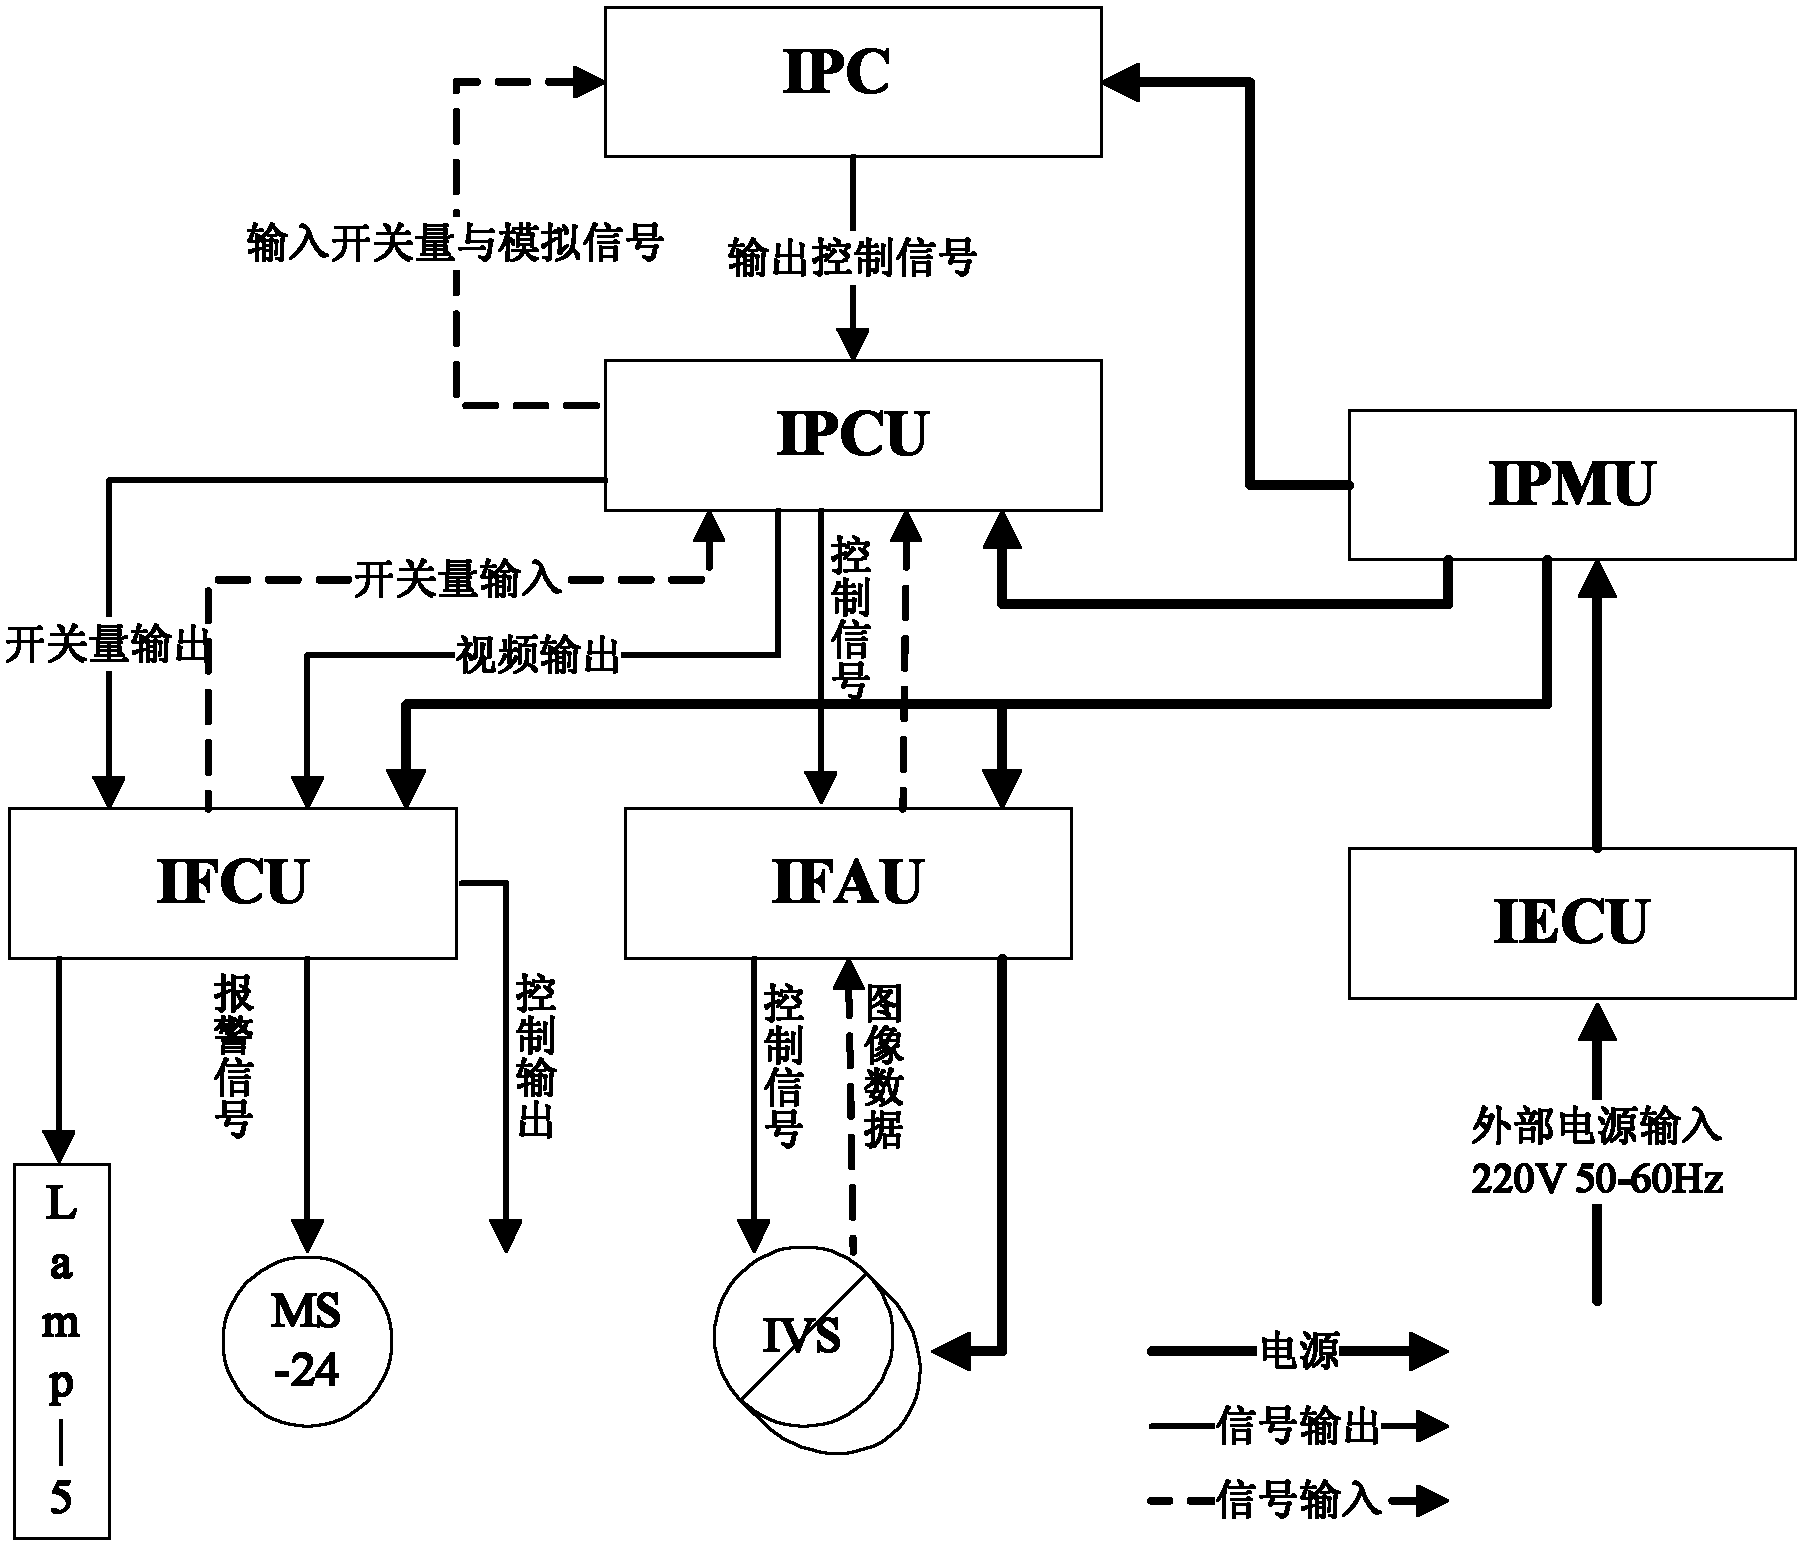 Converter tapping monitoring control system based on thermal image processing